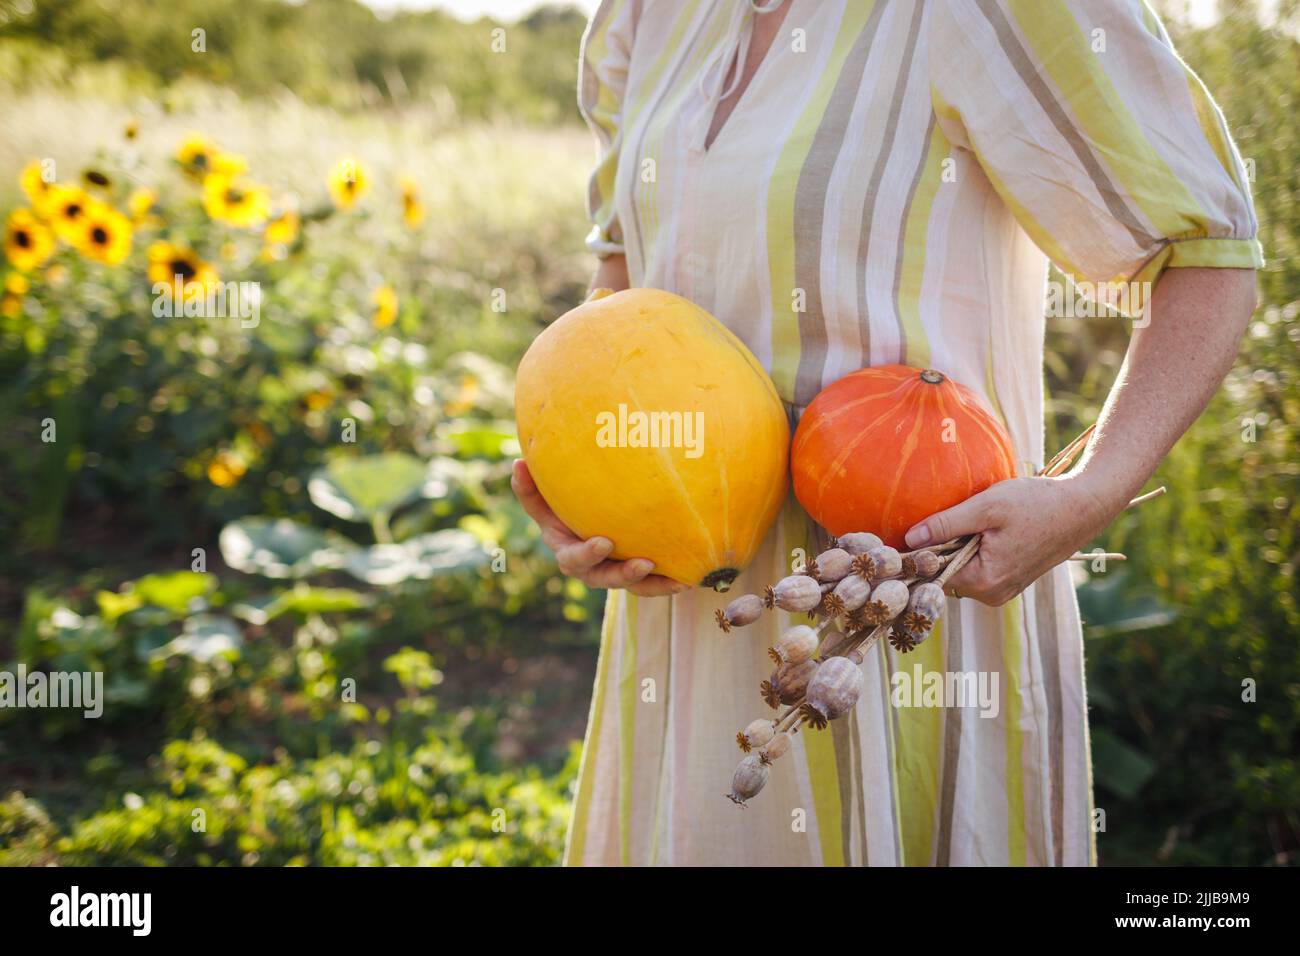 Farmer holding pumpkins and poppy pods in her hands. Woman harvesting homegrown produce from organic garden Stock Photo